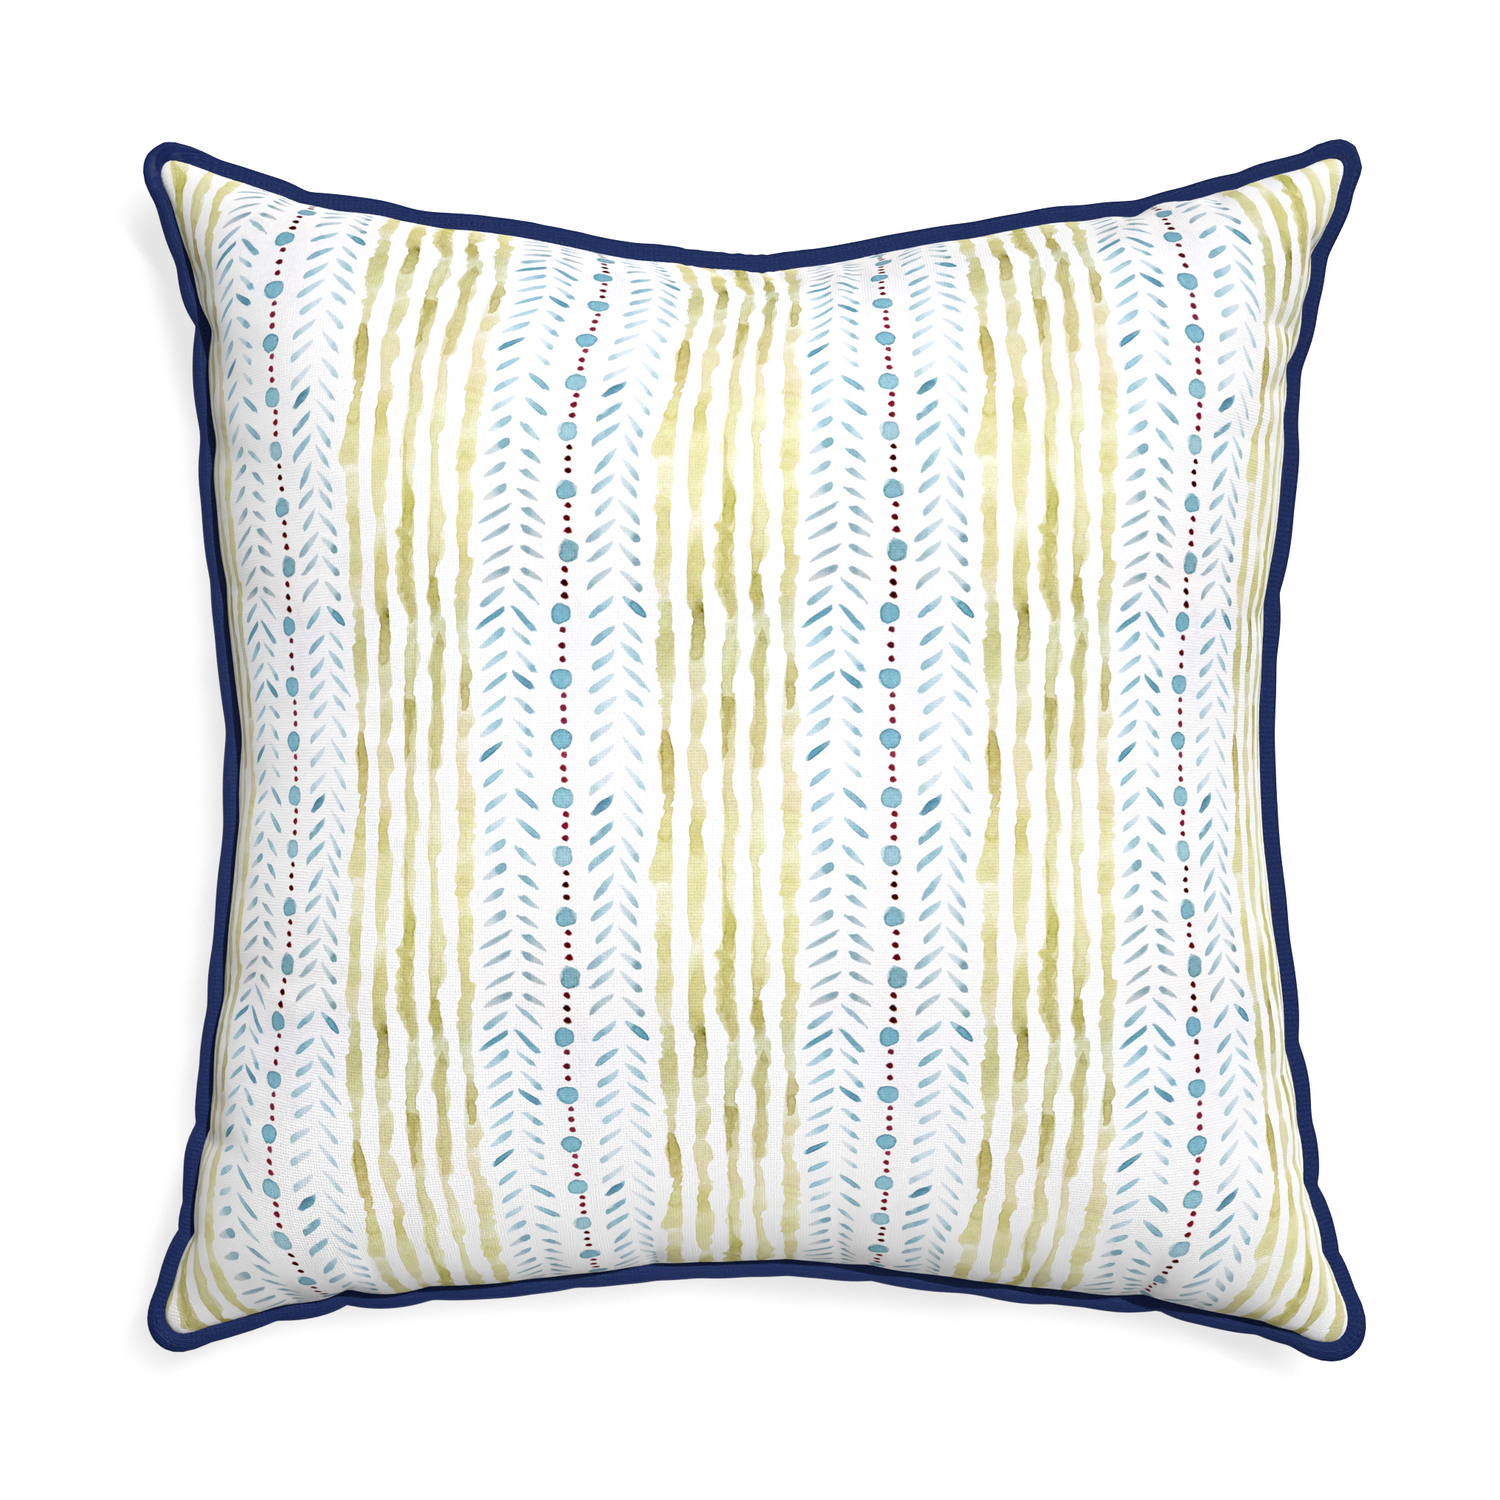 Euro-sham julia custom blue & green stripedpillow with midnight piping on white background